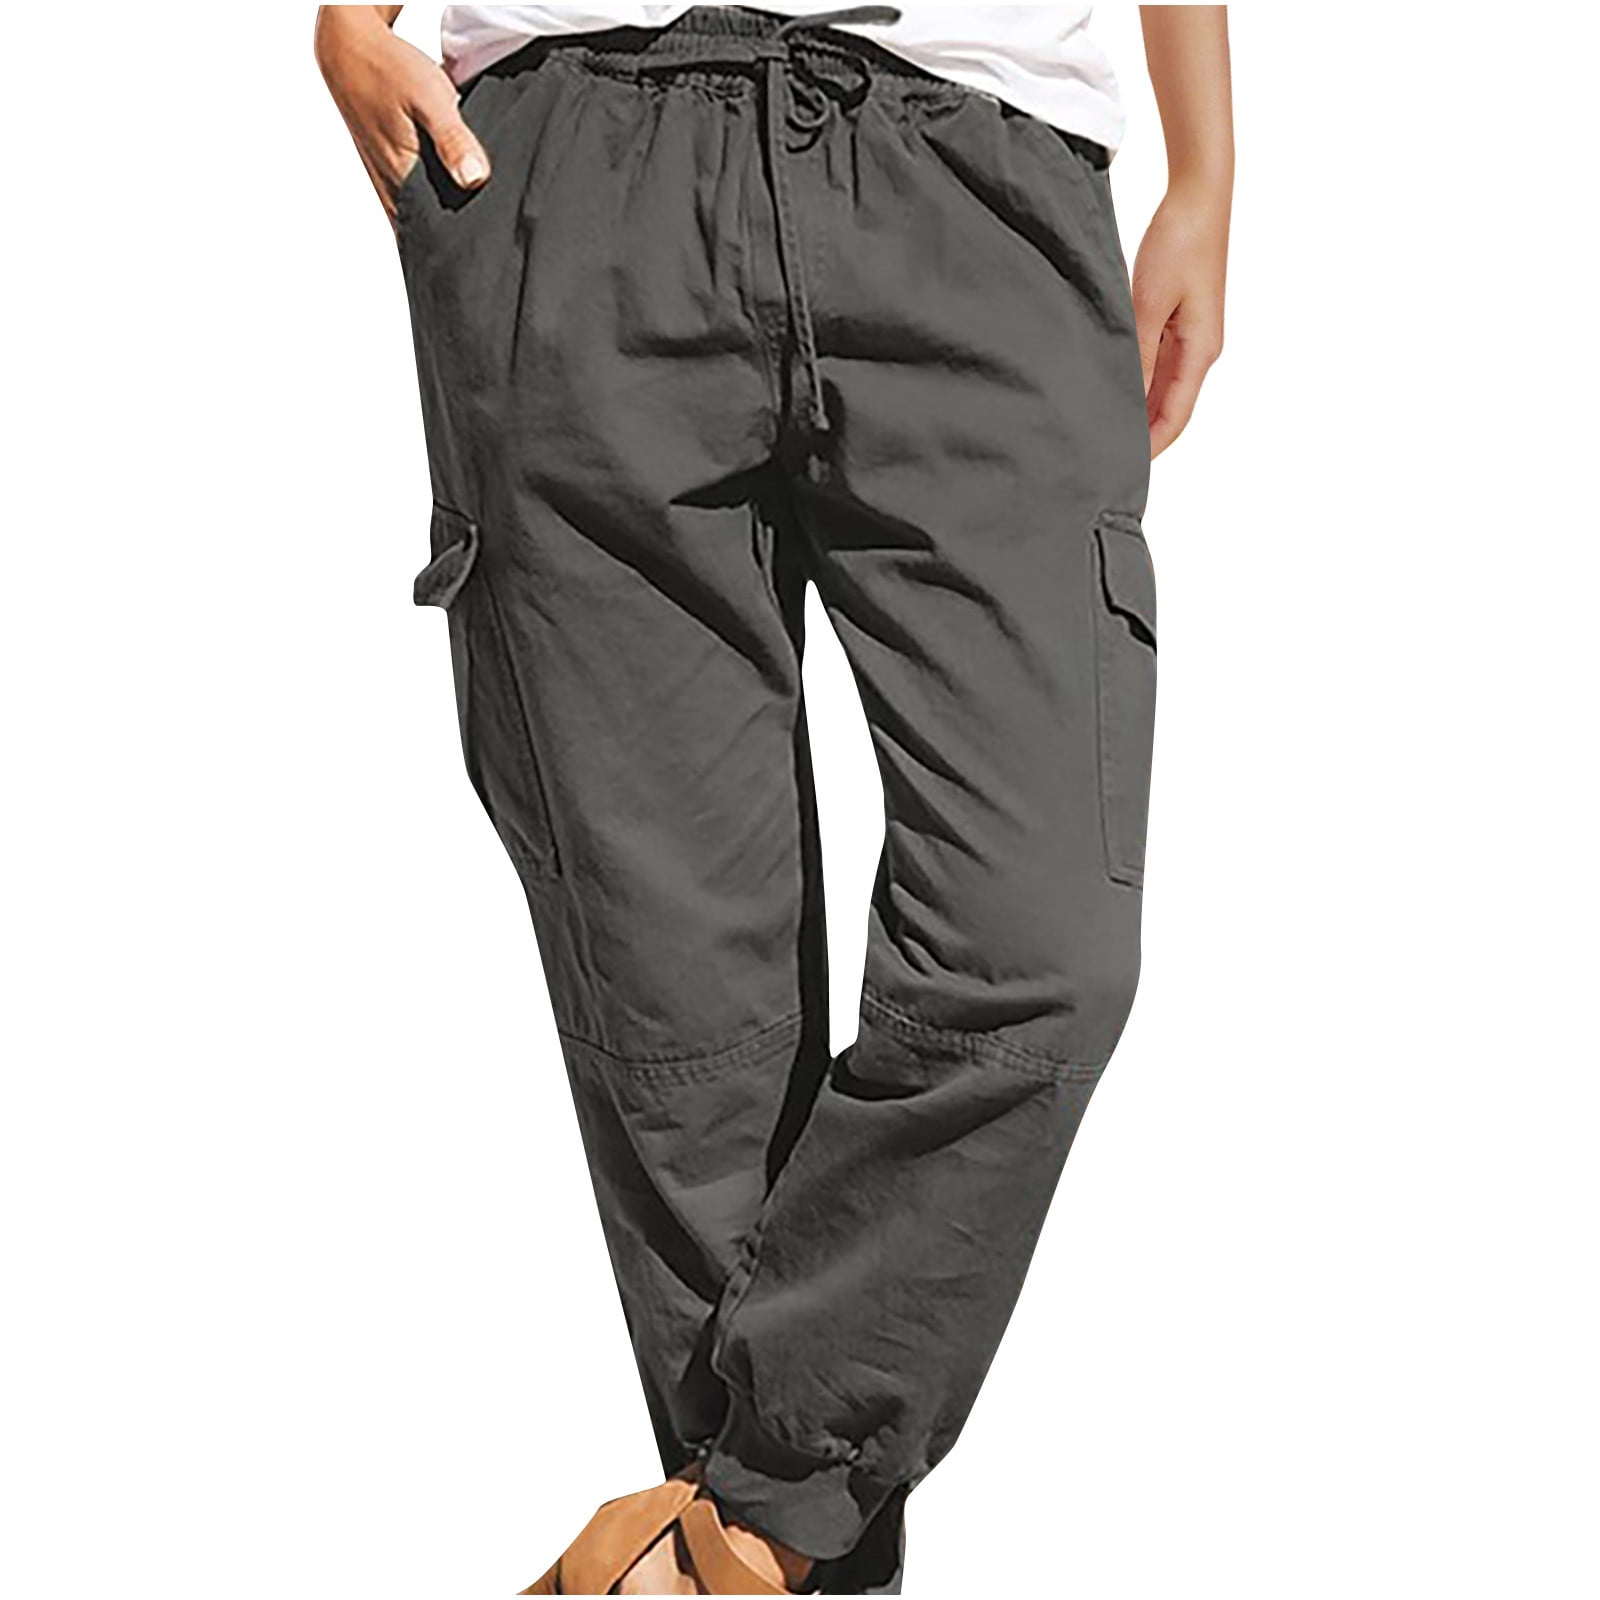 ZIZOCWA Women Parachute Pants Short Pants Women Casual Women'S Plus Size  Tethered Straight Cargo Pants Straight Wide Leg Loose Casual Trousers Pants  For Running Women 